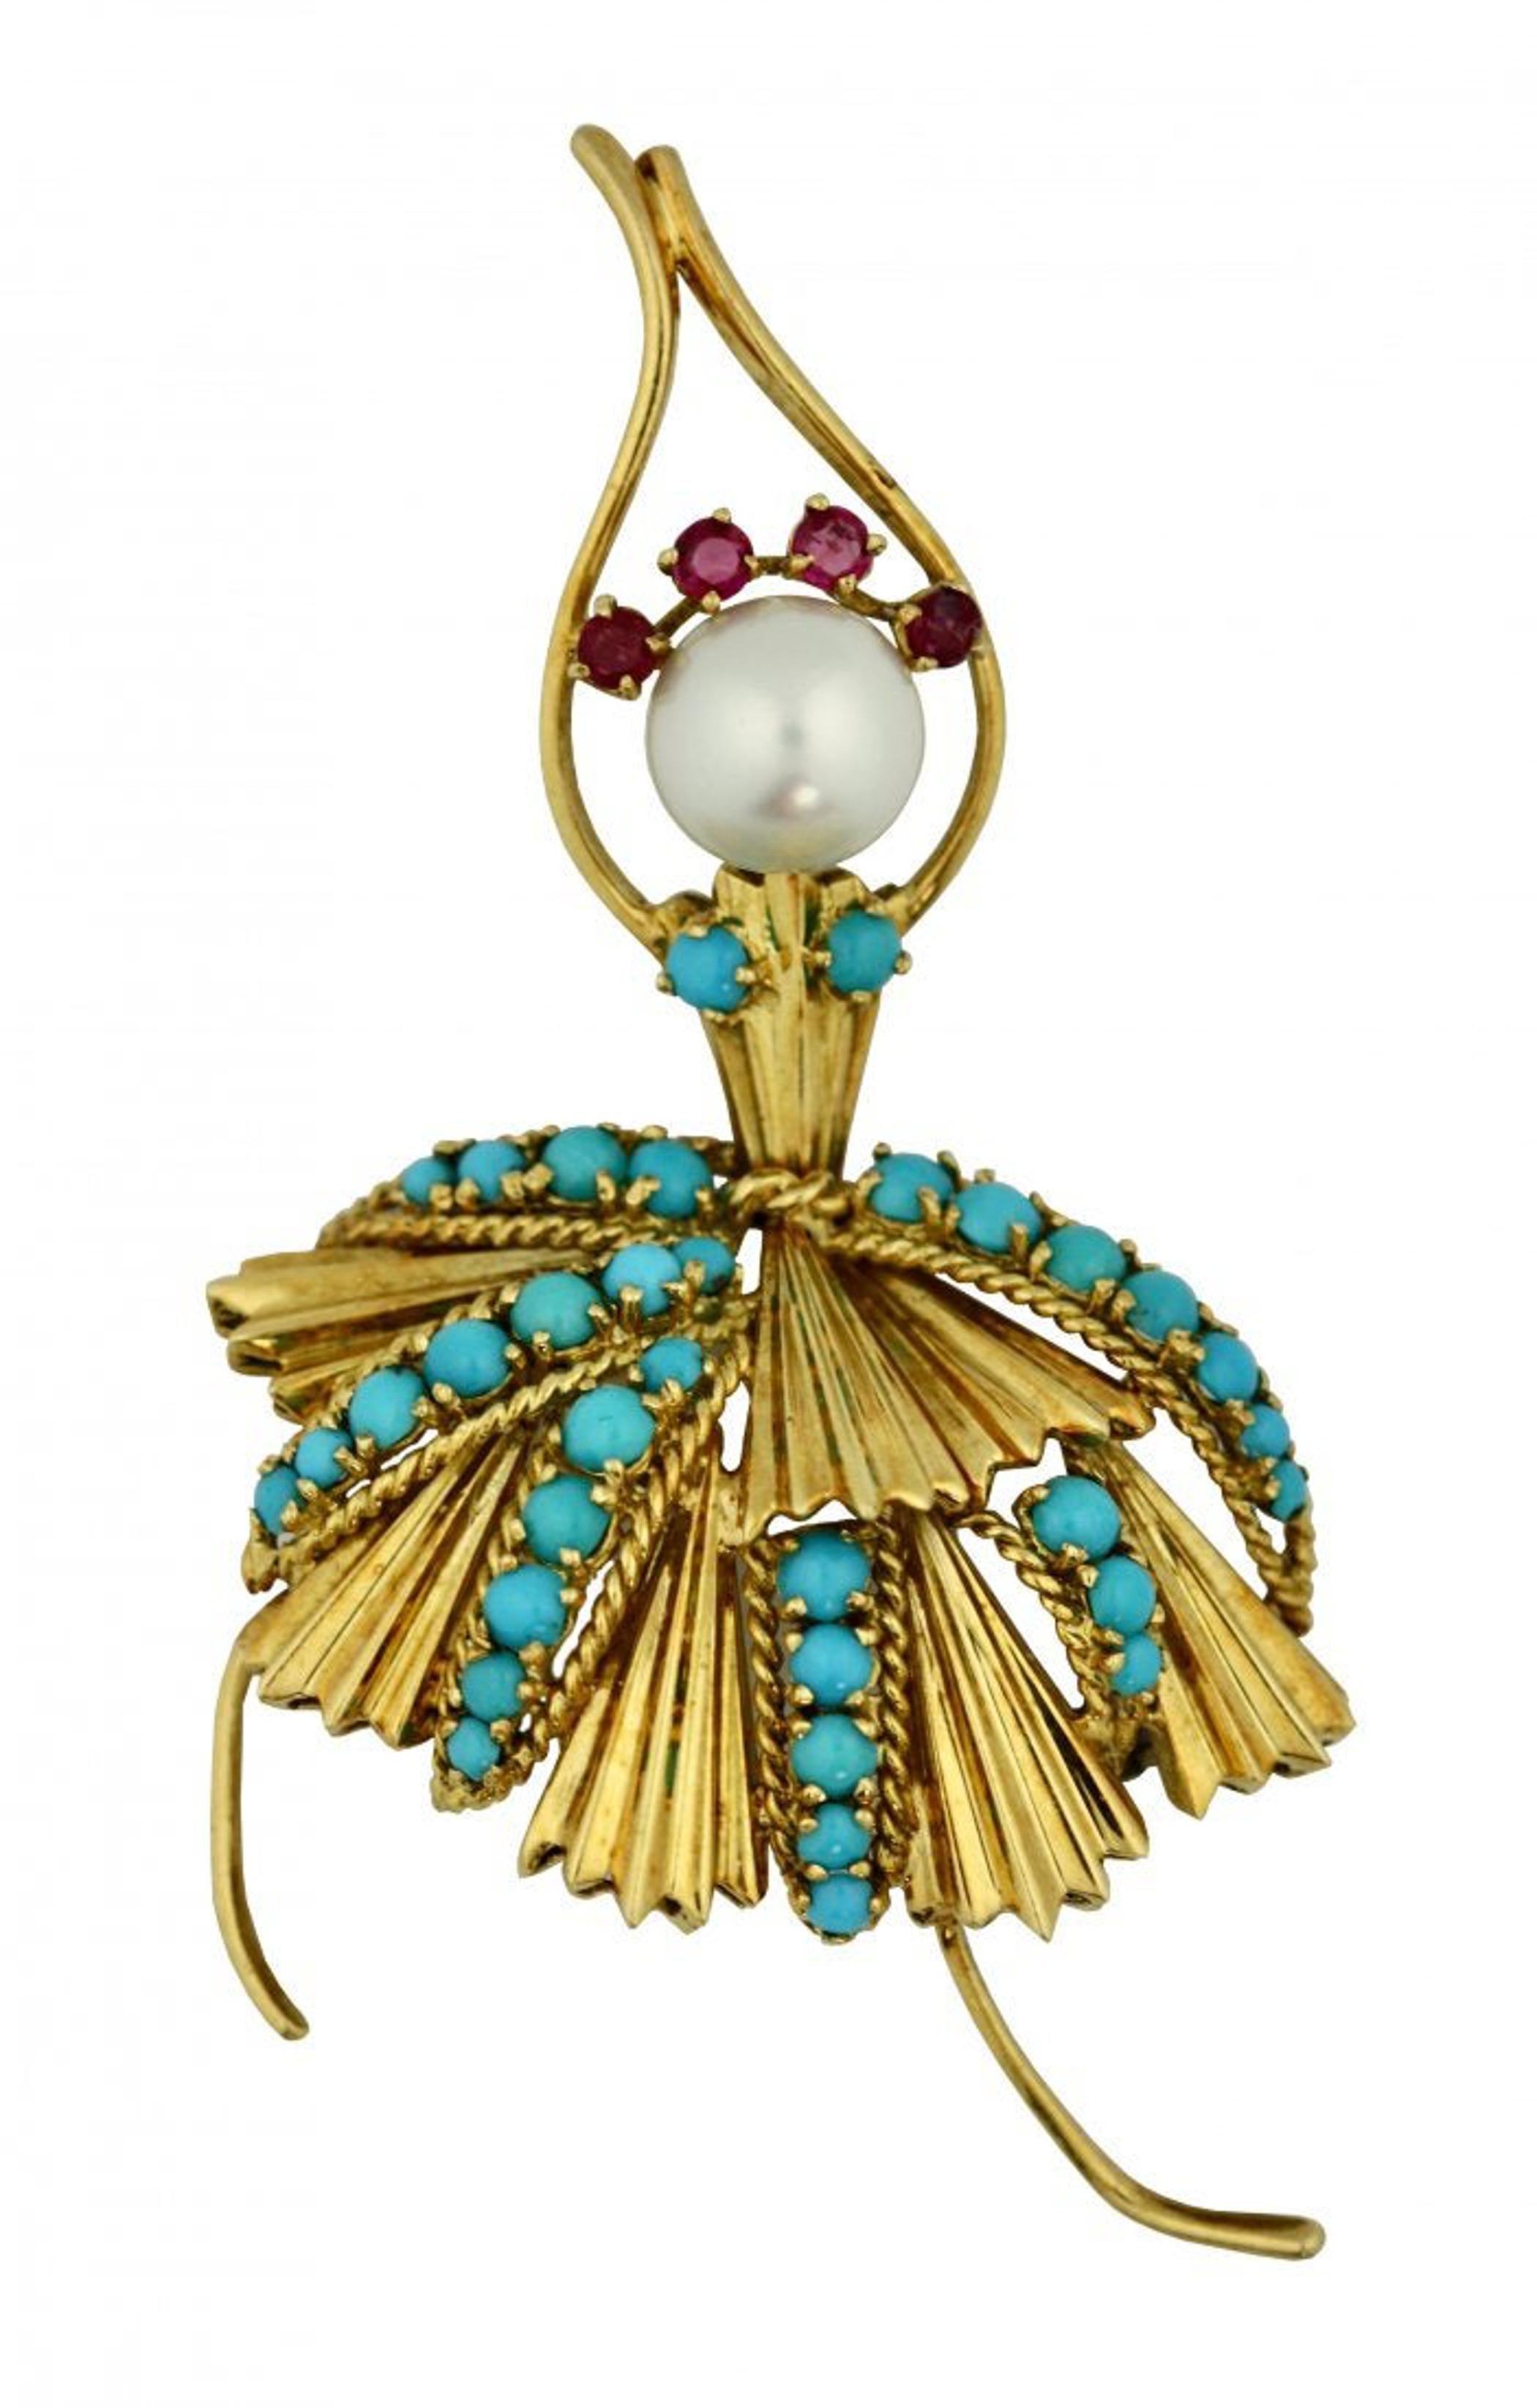 Spritzer & Fuhrmann 
Turquoise and Pearl Ballerina Brooch
Designed as a ballerina, the skirt set with turquoise, mounted in 18kt Yellow Gold. gross weight approximately 9.6 dwts
DIMENSIONS
length 7 cm.